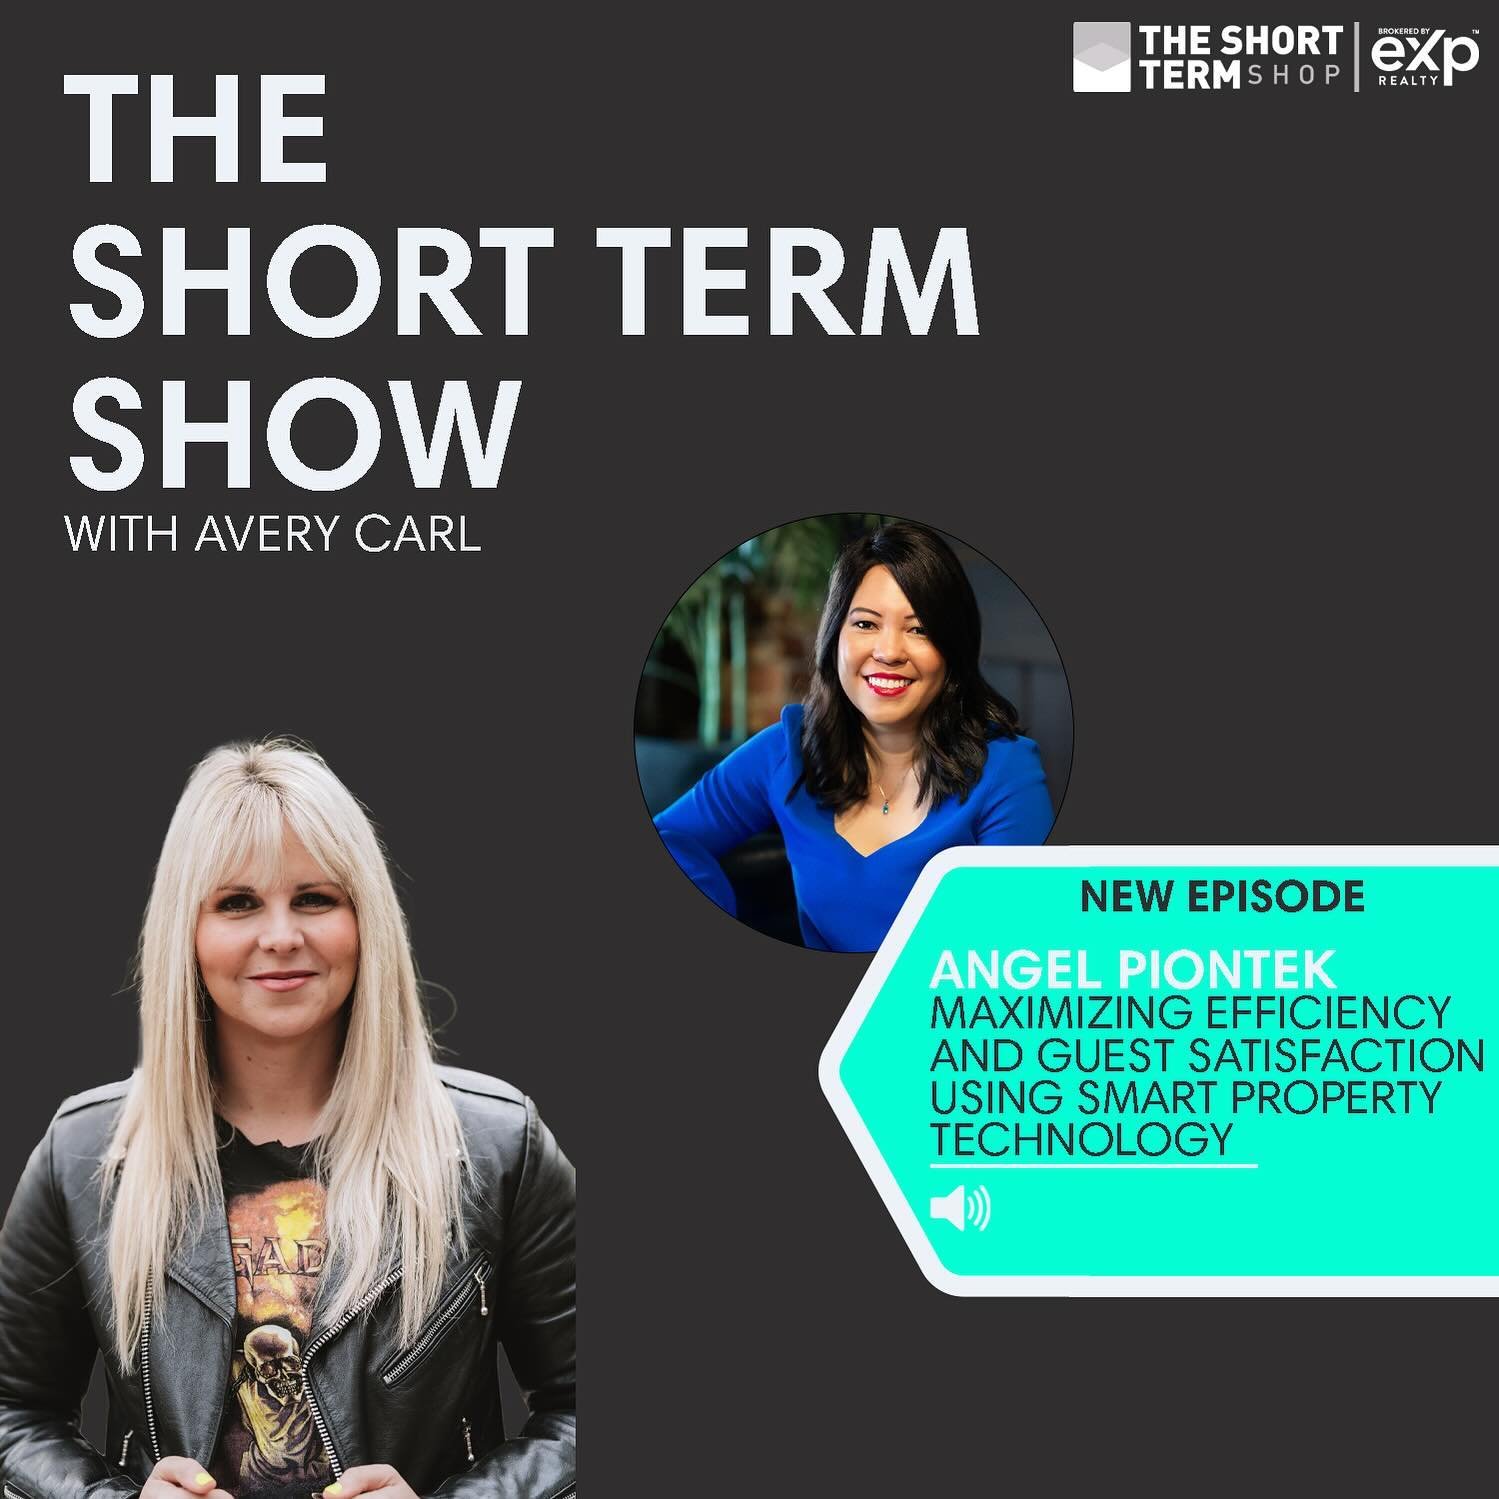 Chatted with Avery at the @theshorttermshop recently about how #smarthome technology can be a game-changer in short-term rentals! Link in bio to listen to the podcast!

#str #shorttermrental #iot #enterprise #smarthometechnology #realestate #podcast